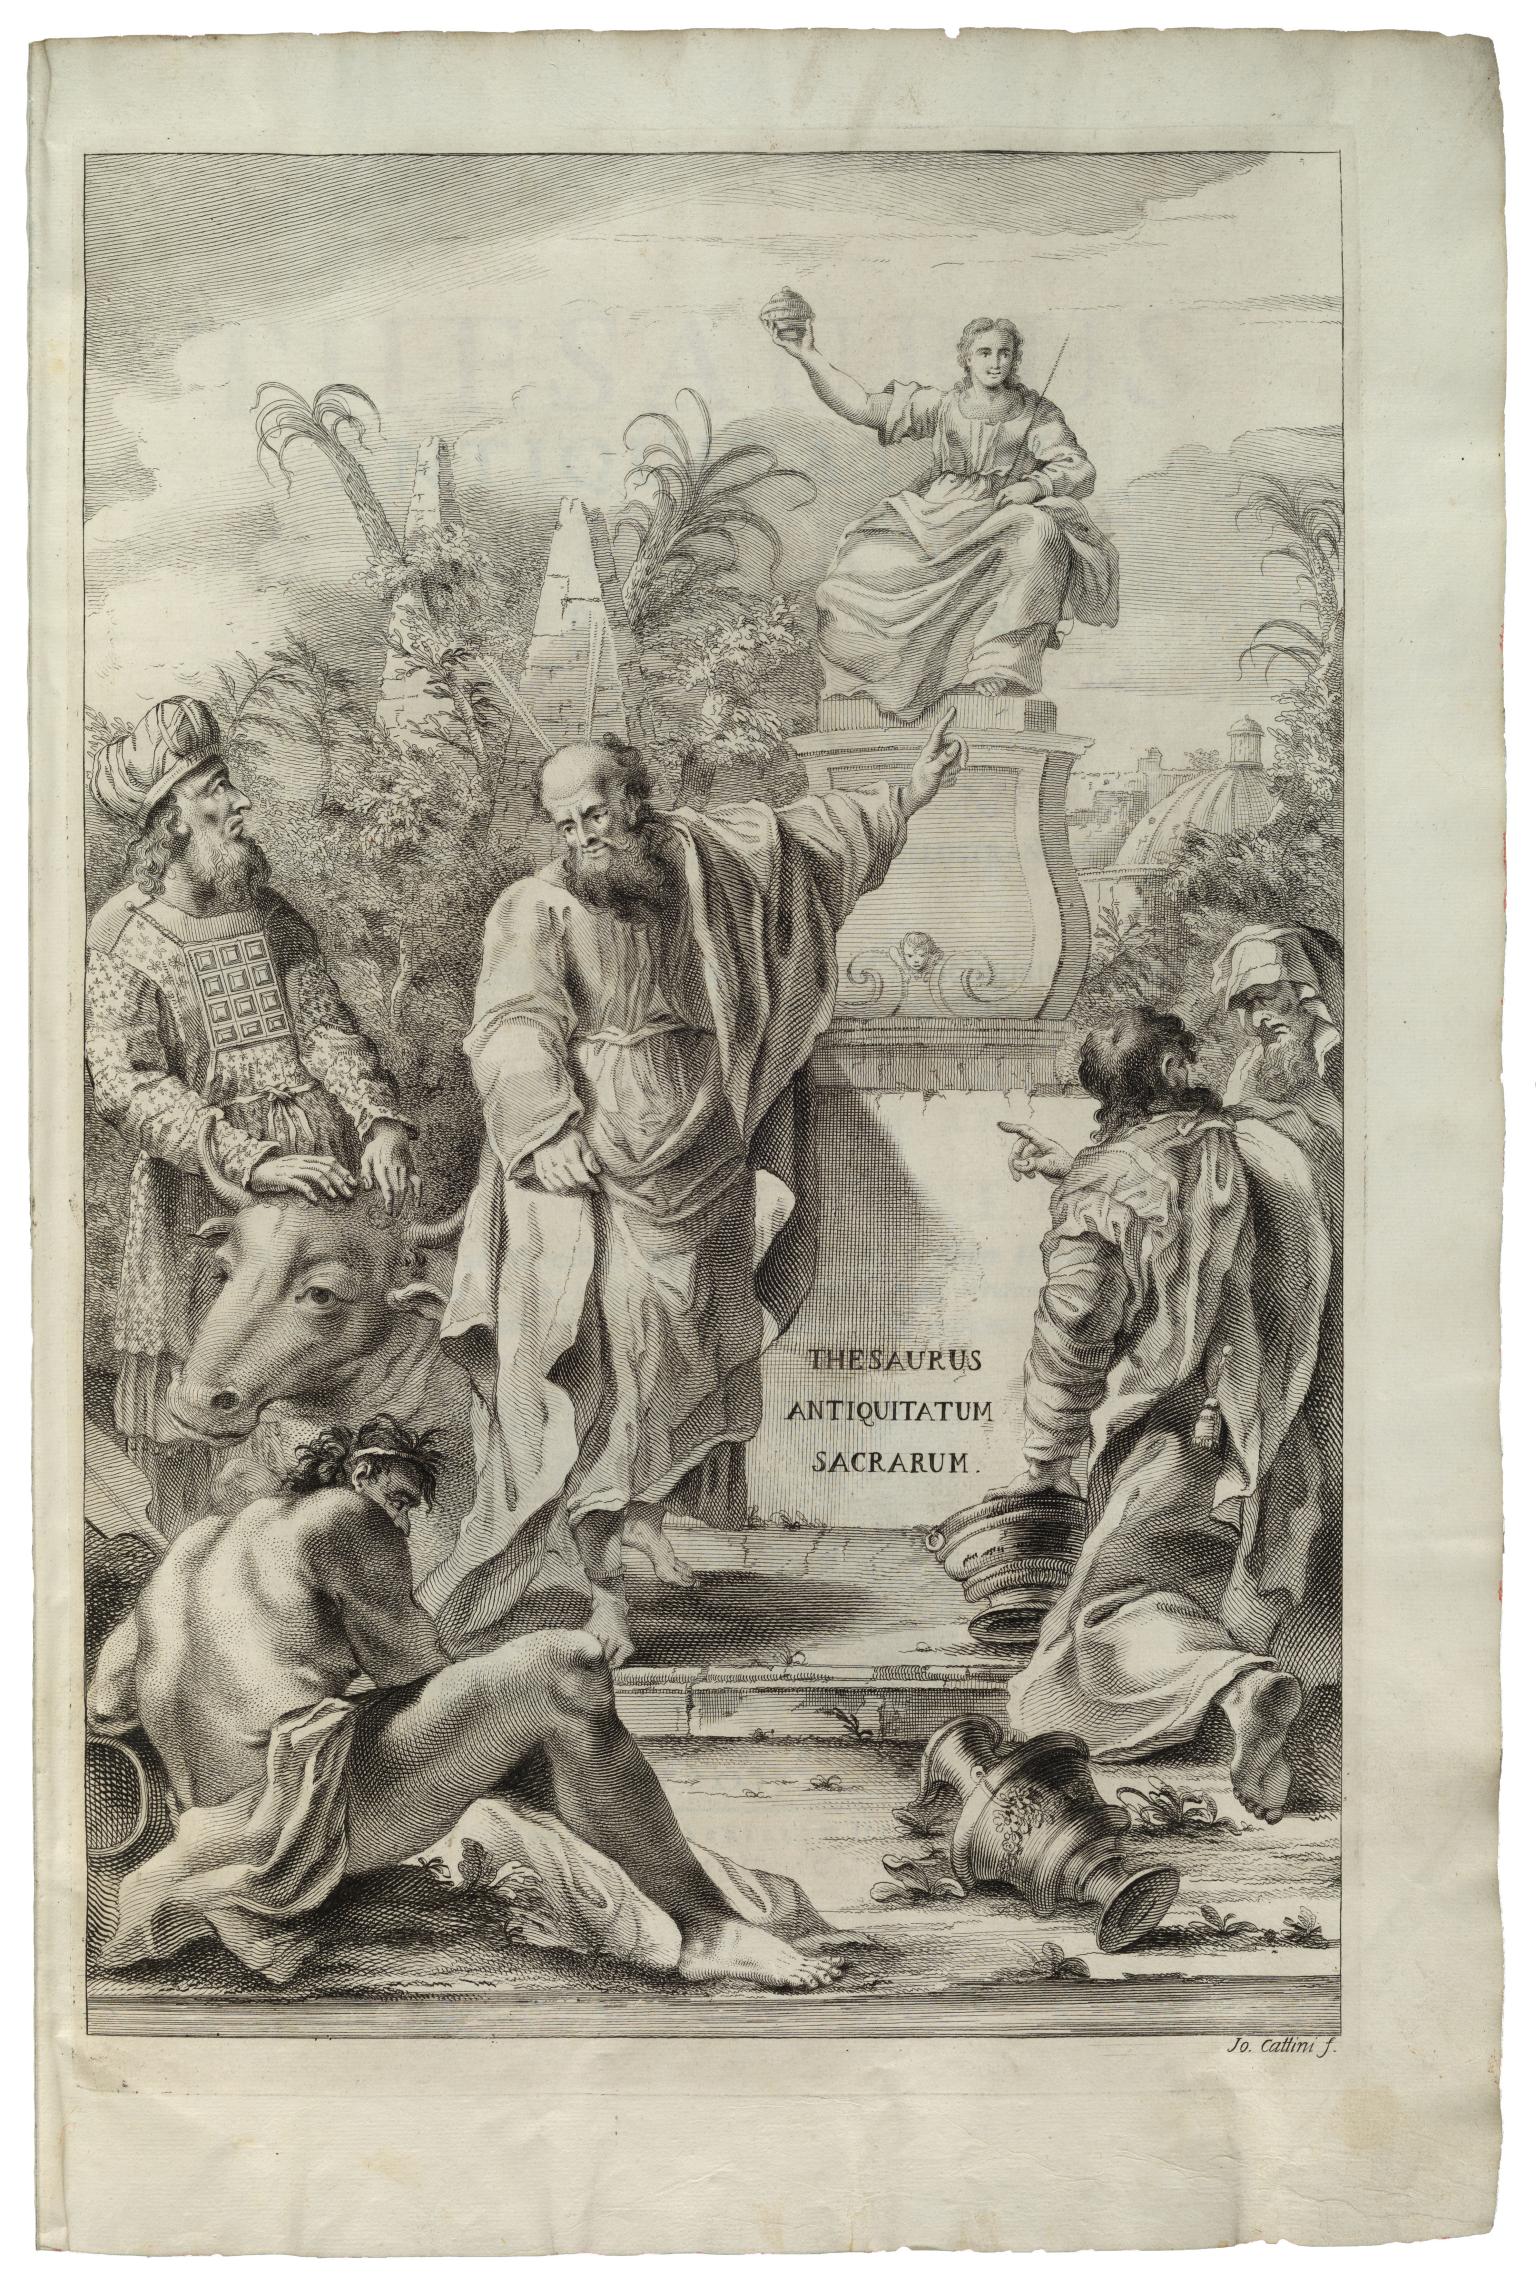 Printed page with male figures in various poses with one pointing to a sculpture in the background of seated figure on pedestal with Latin text on it. 